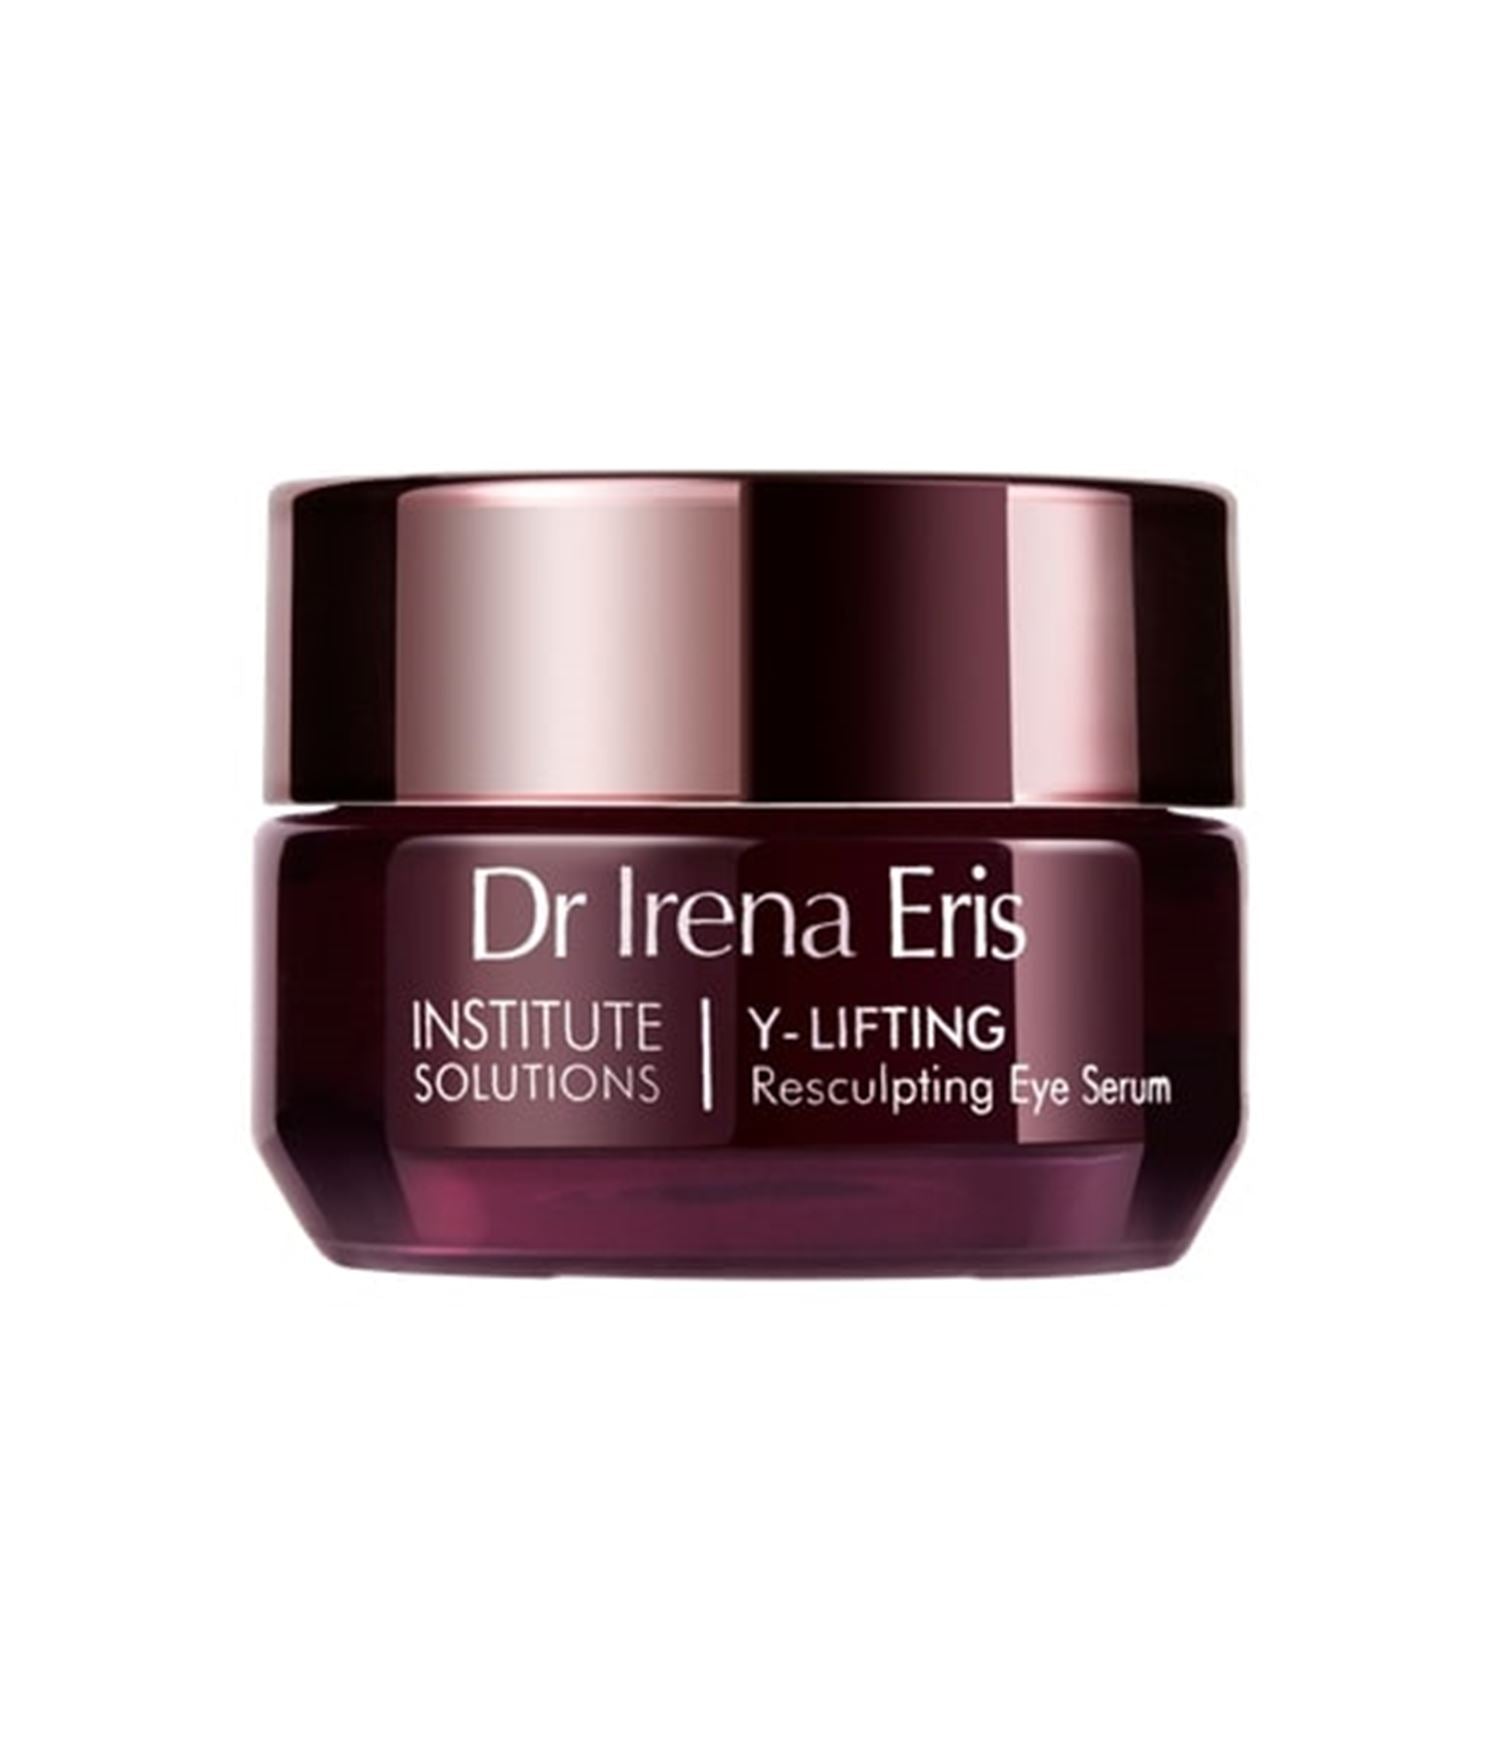 Dr Irena Eris Institute Solutions Y Lifting Resculting Lift Eye Serum 15 ml